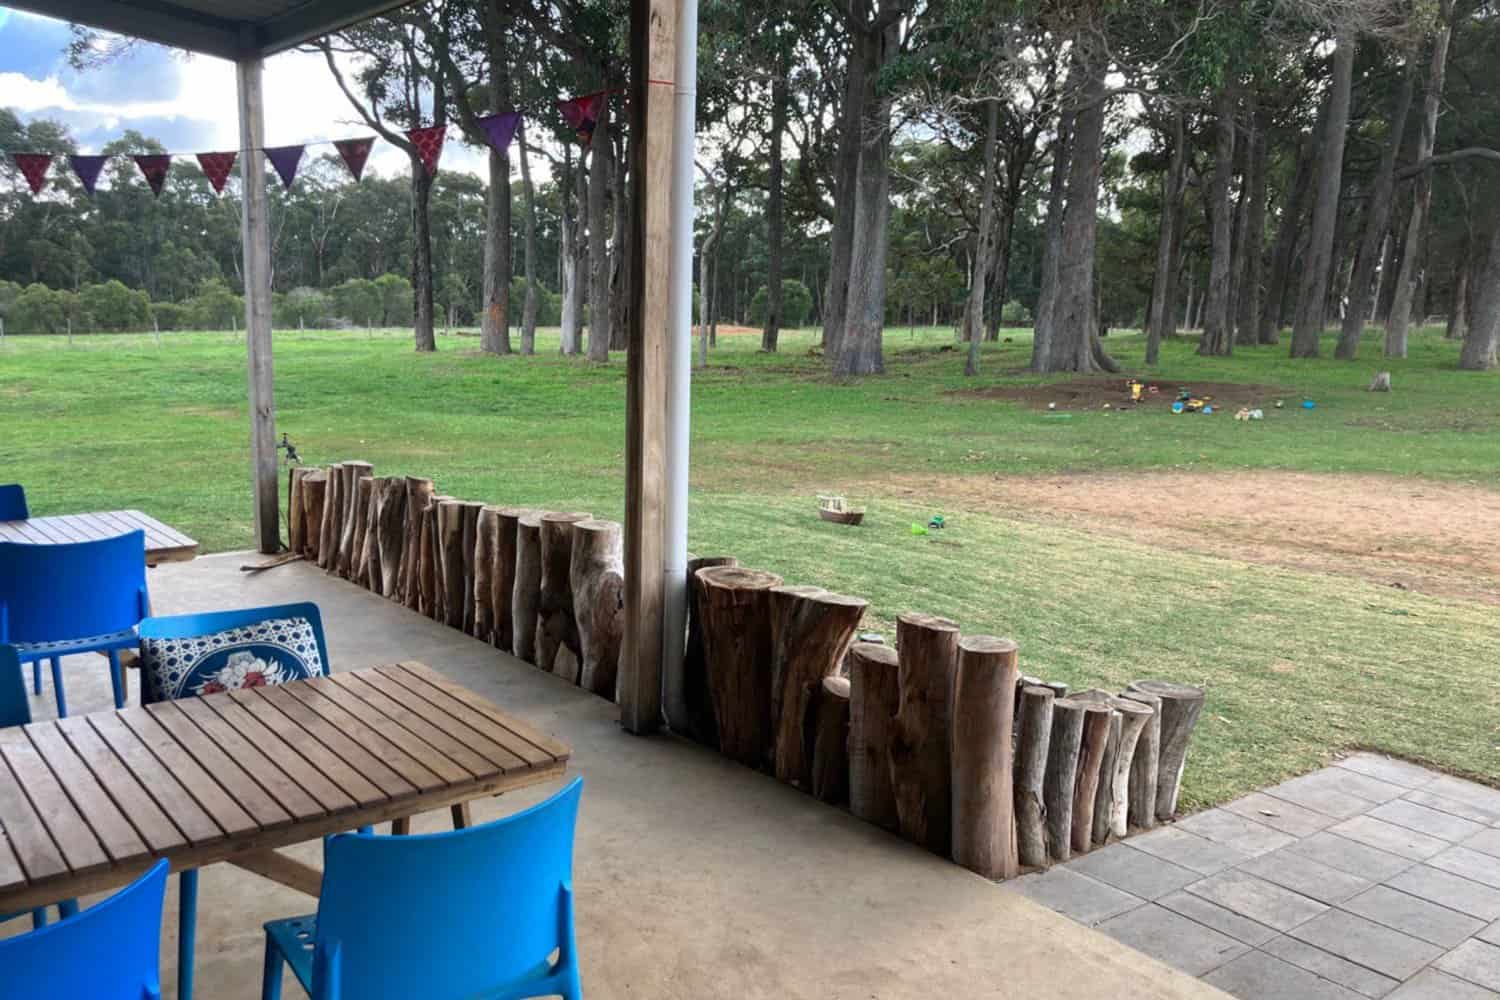 Scenic coffee tables overlooking a spacious grass lawn in Margaret River. The image showcases a peaceful outdoor setting where customers can enjoy the best coffee in the area. Children's toys are scattered on the lawn, creating a family-friendly atmosphere for visitors.